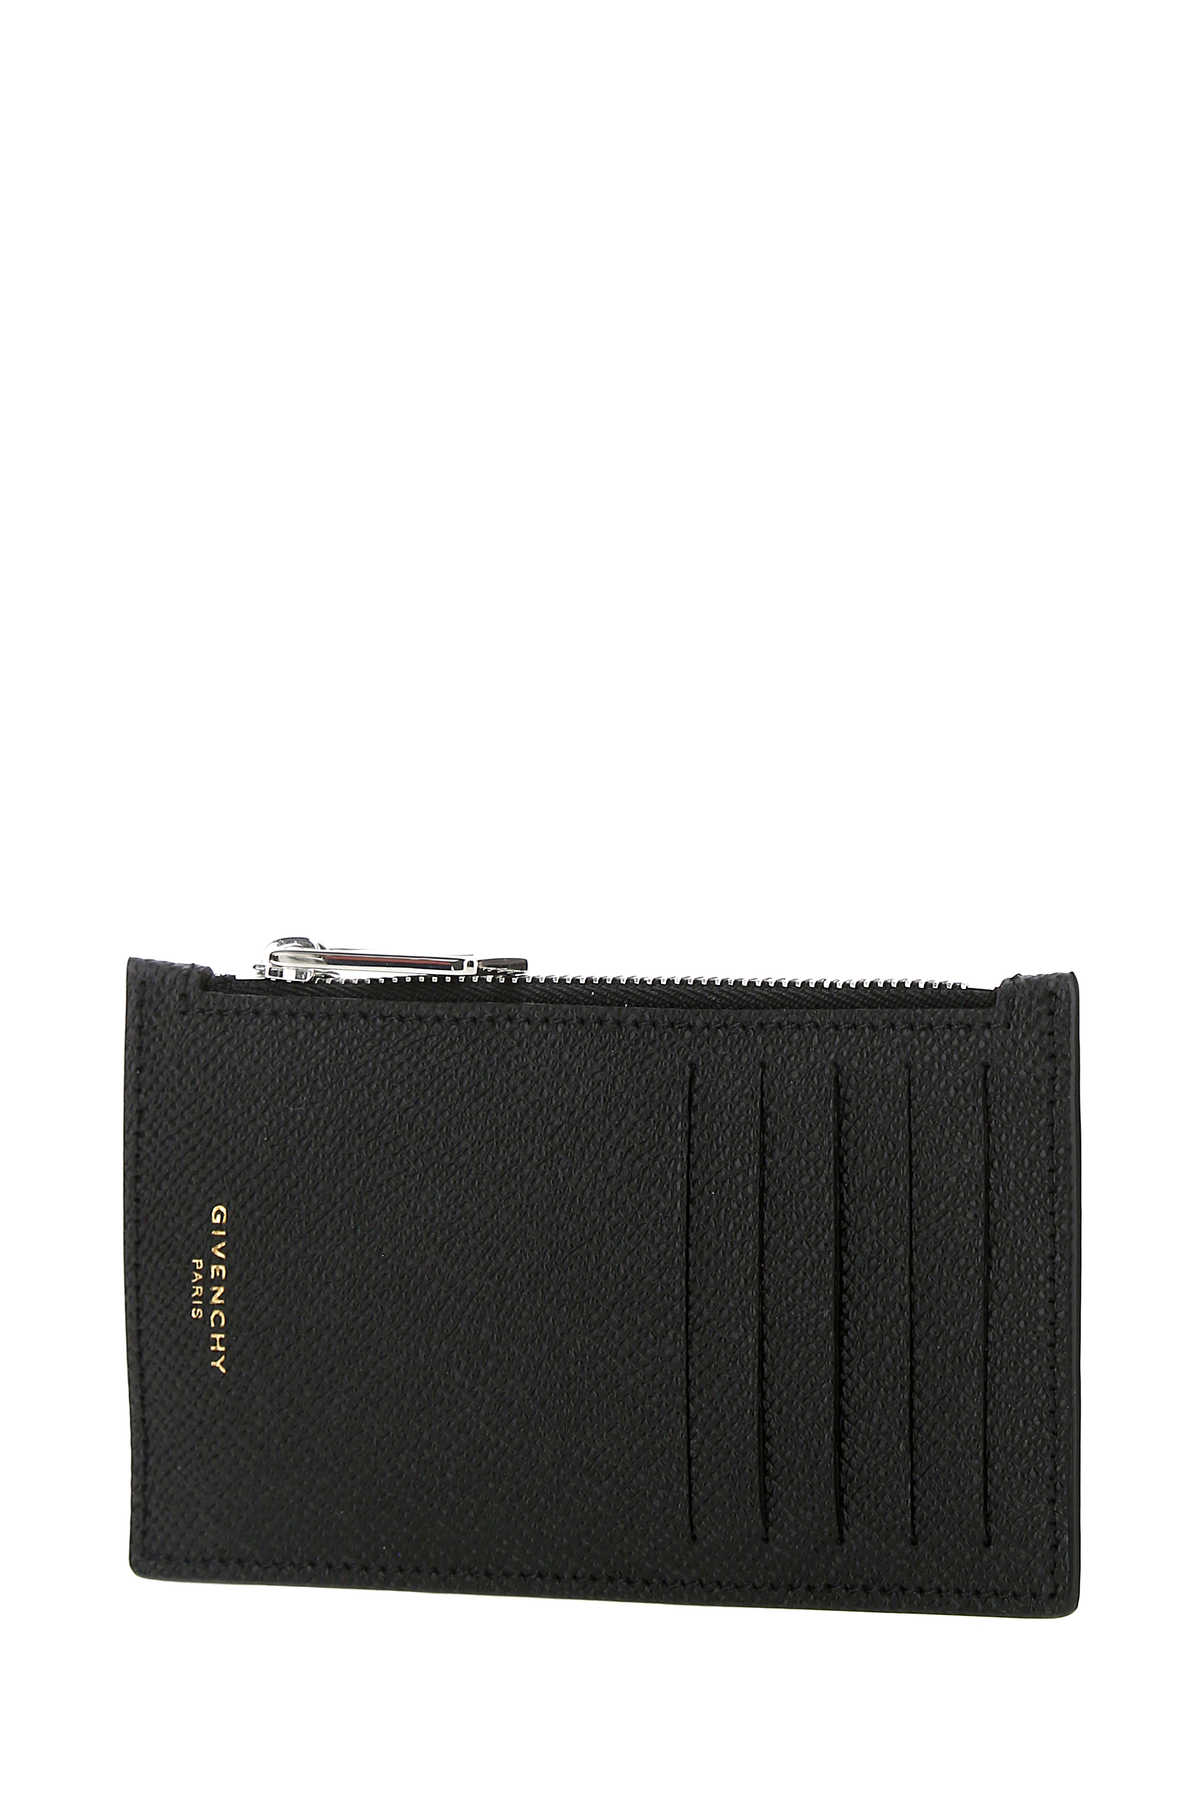 Givenchy Black Leather Card Holder In 001